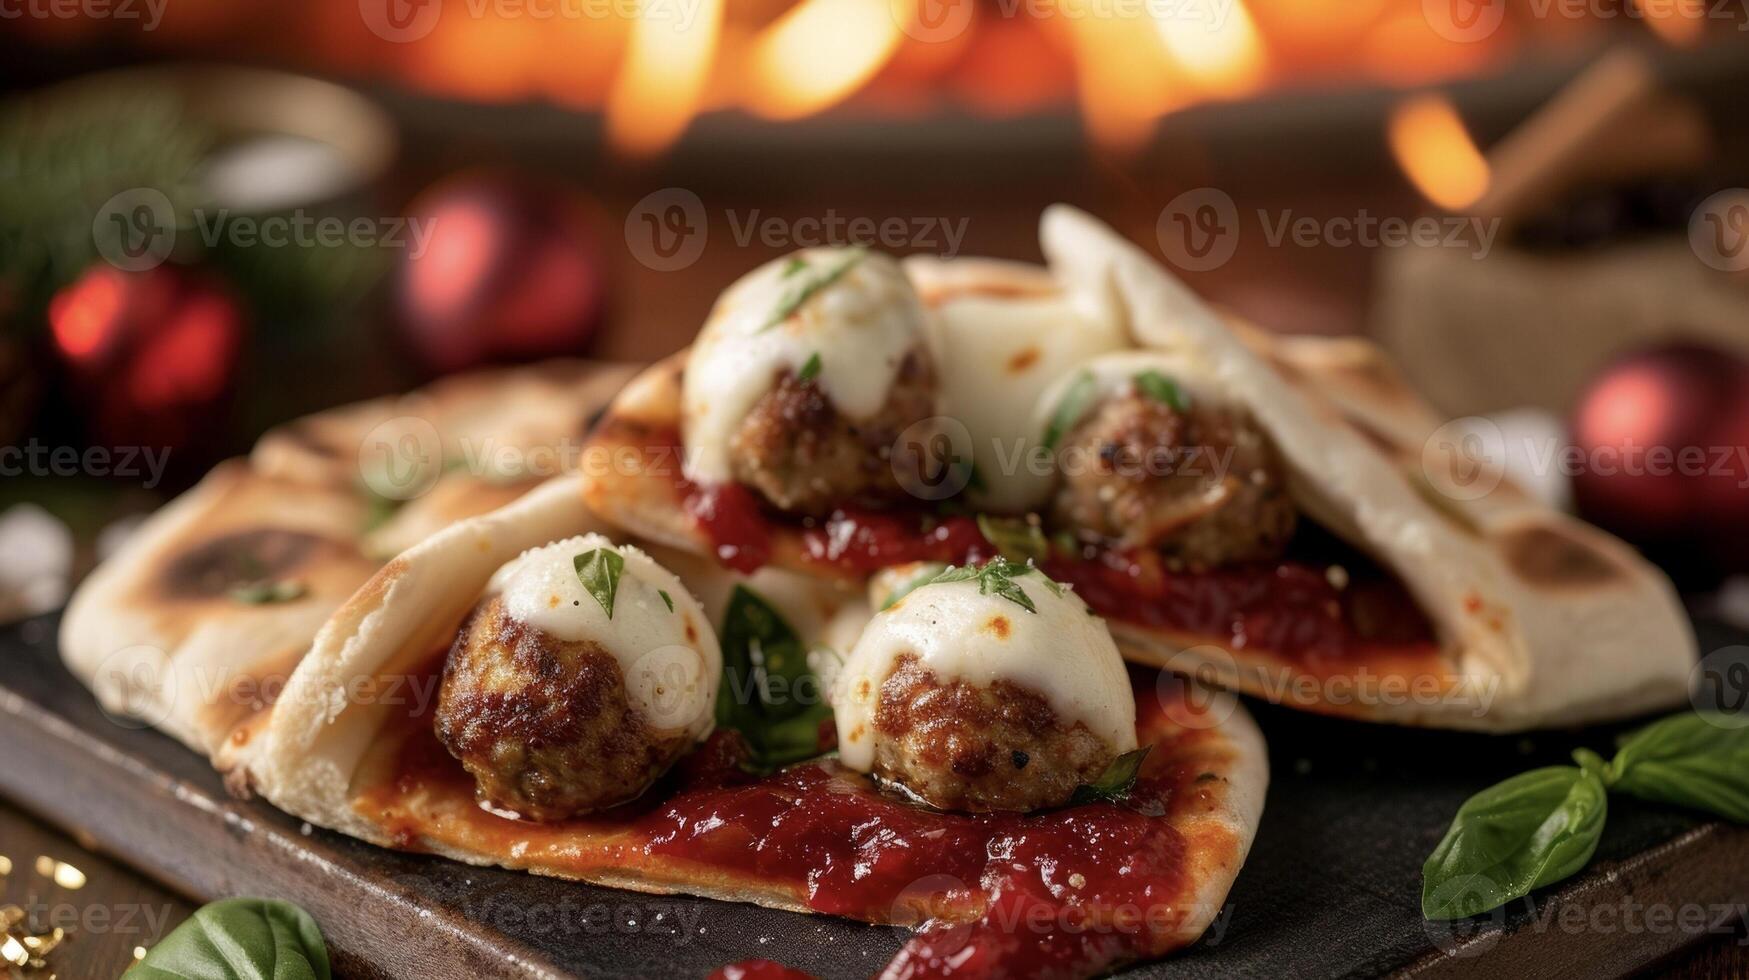 Step into a winter wonderland with these festive fireplace pita pockets b with sweet cranberry sauce savory turkey meatballs and melty mozzarella cheese. The flickering flame photo